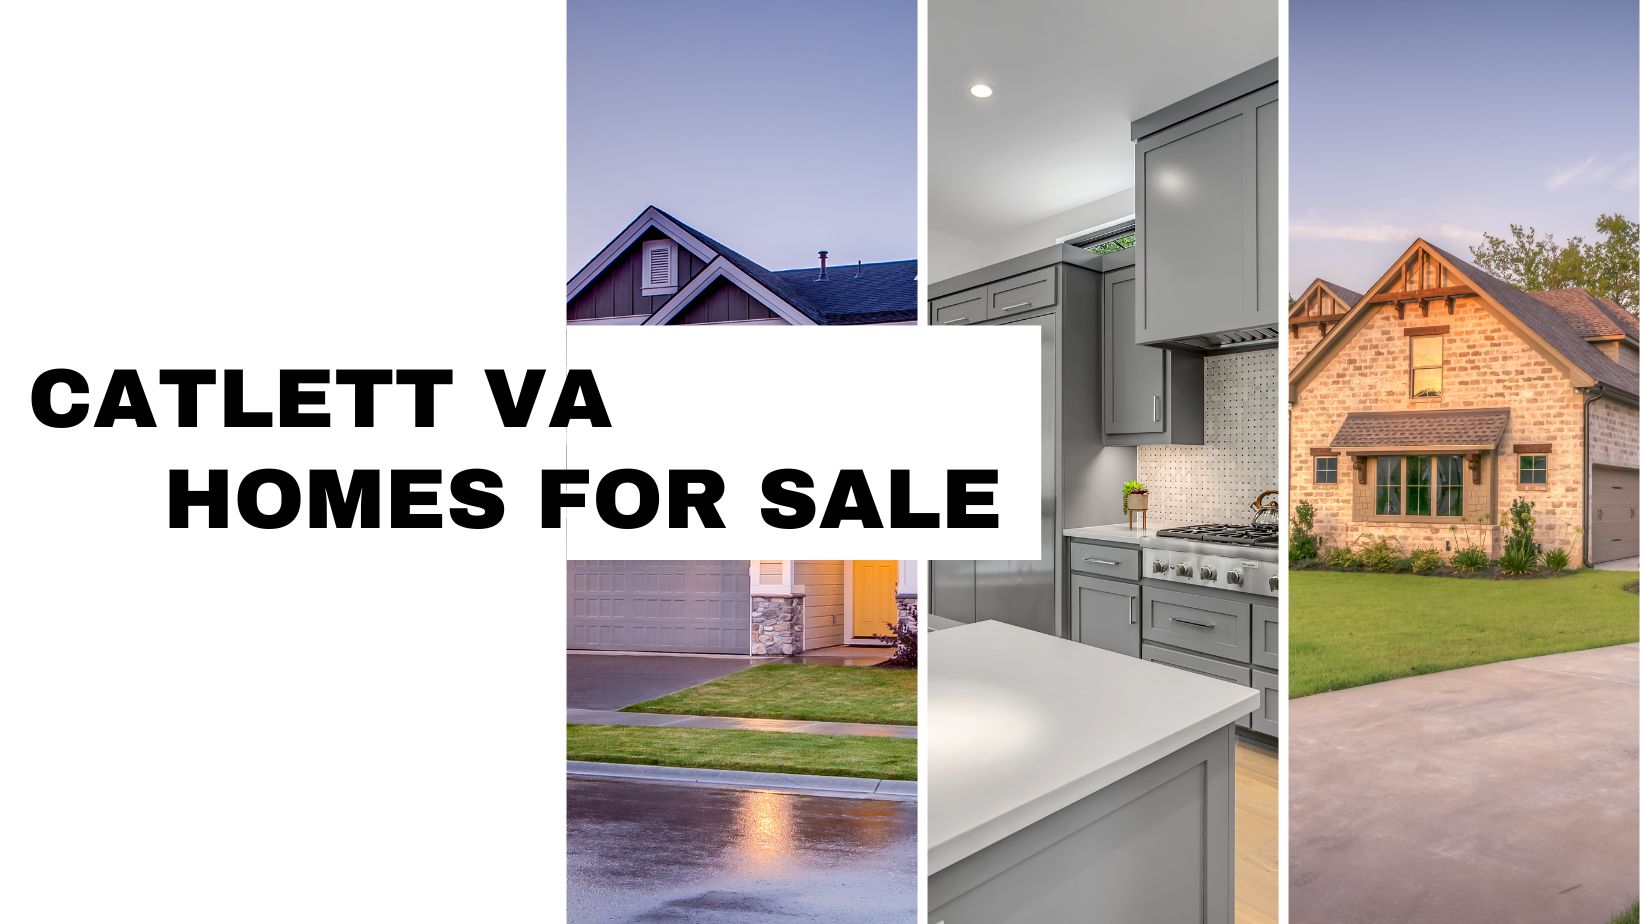 Catlett VA Homes for Sale Fauquier County